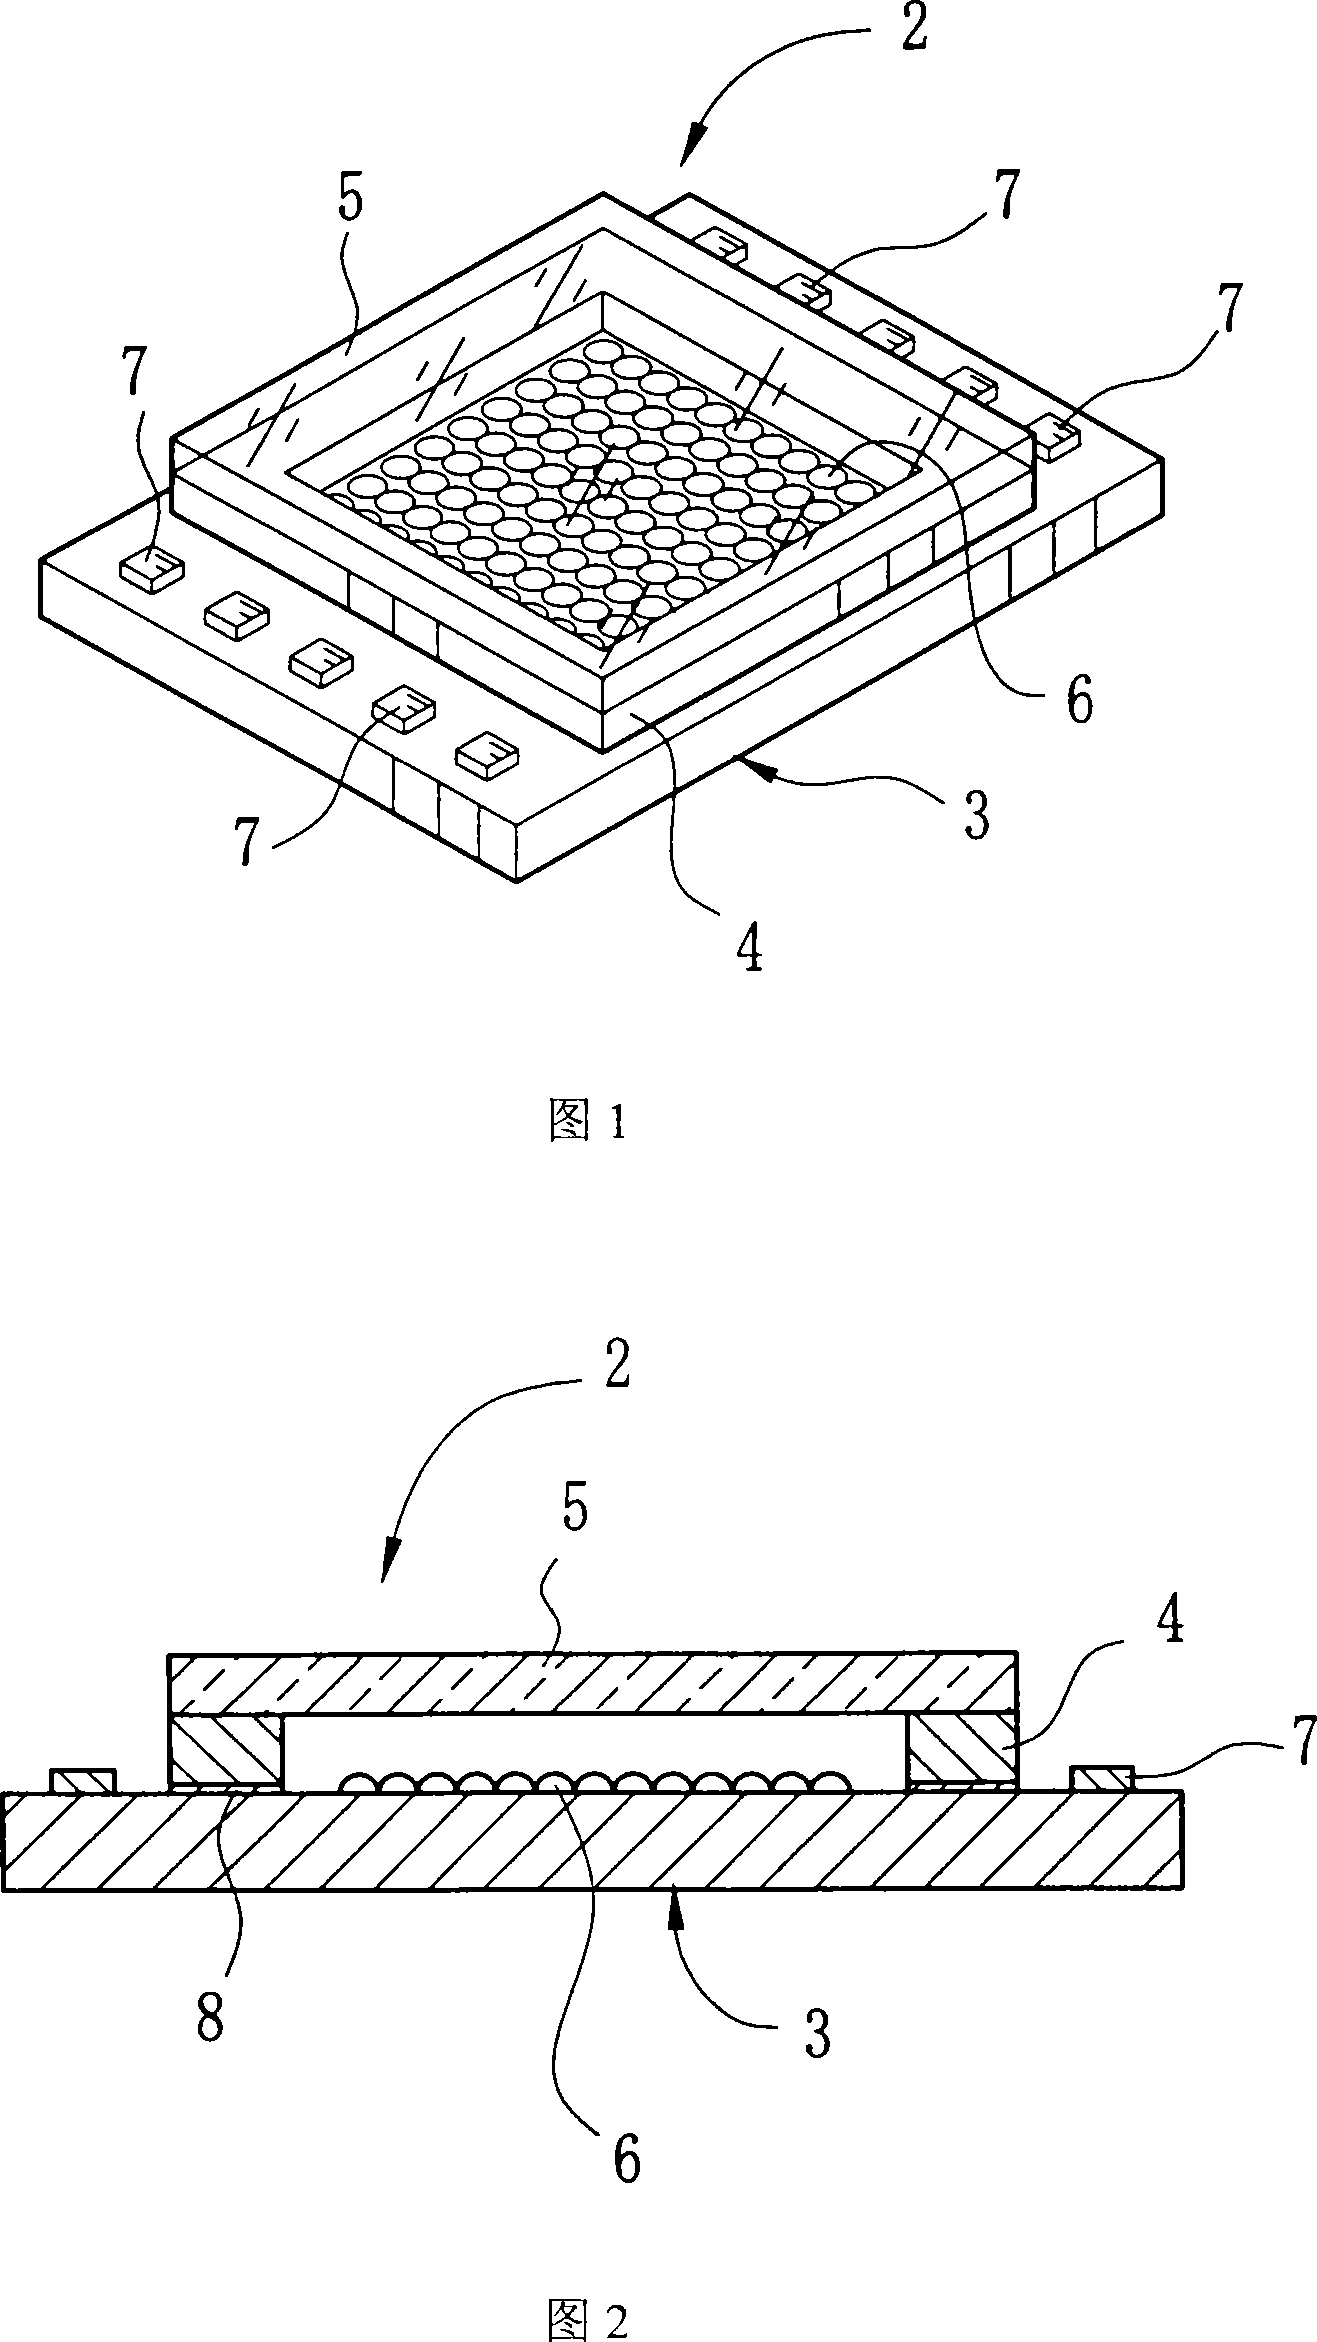 Device and method for joining substrates